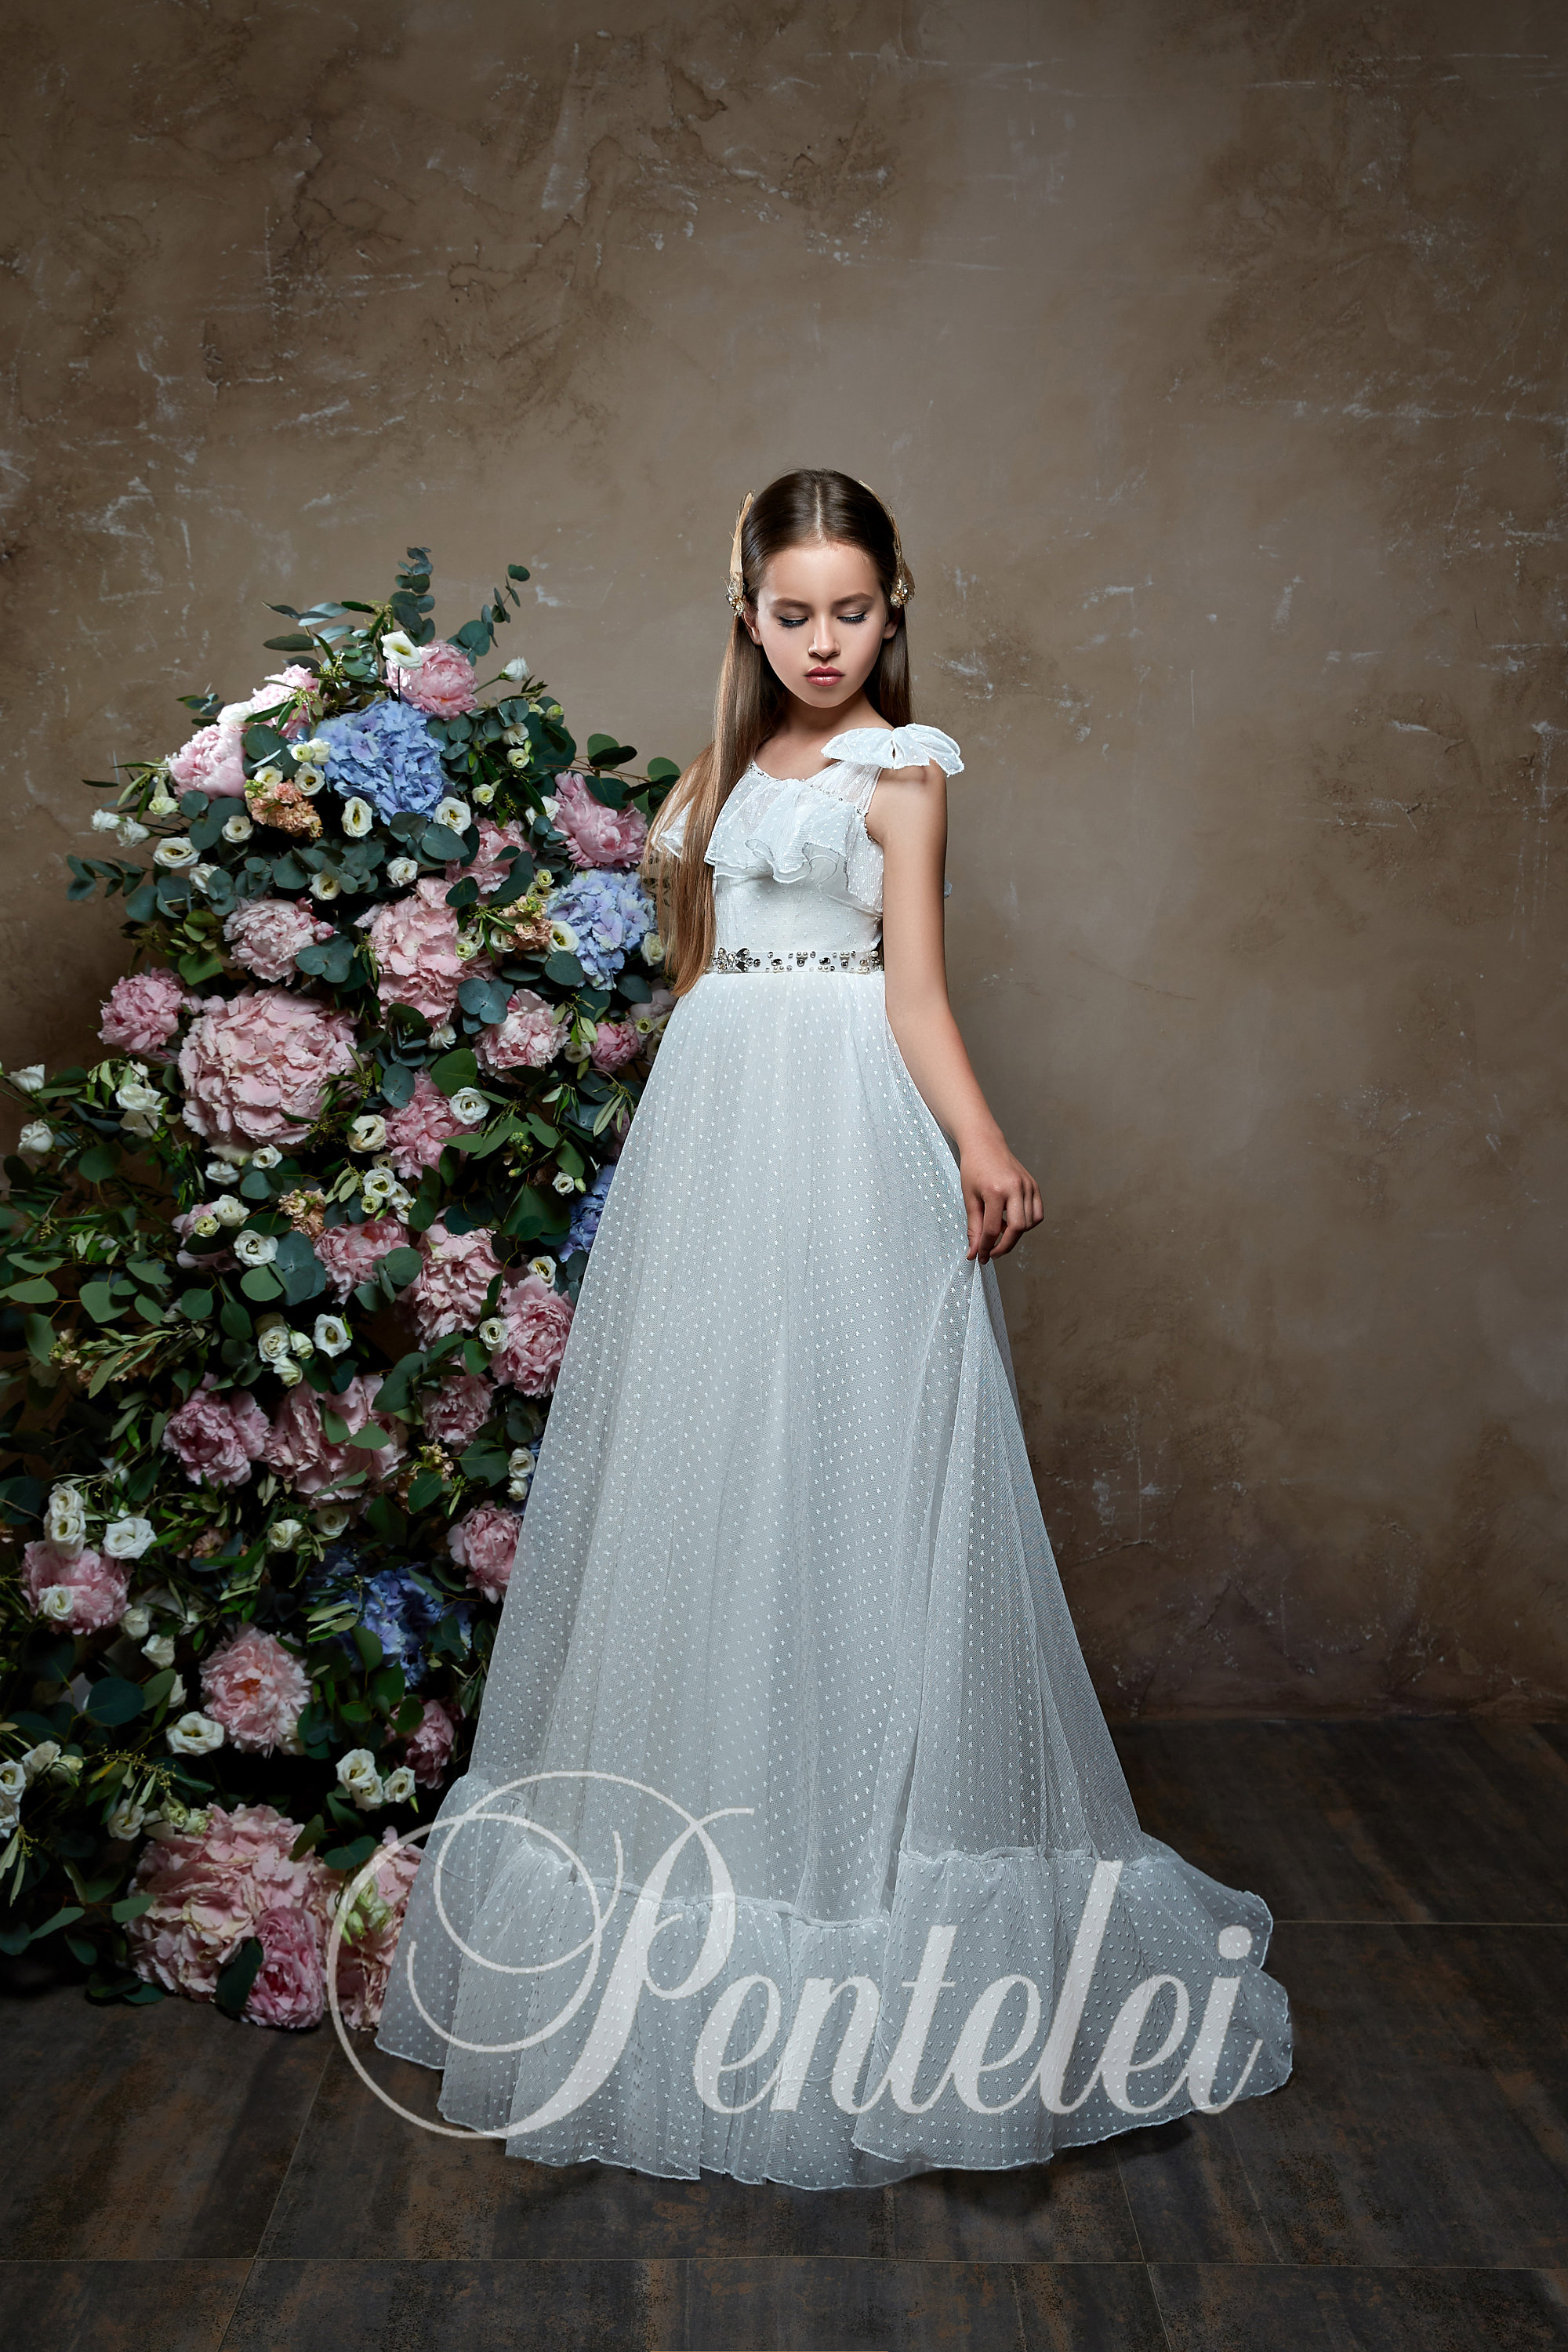 Beautiful Clothes For Girl, Beautiful Dresses Images For Girls